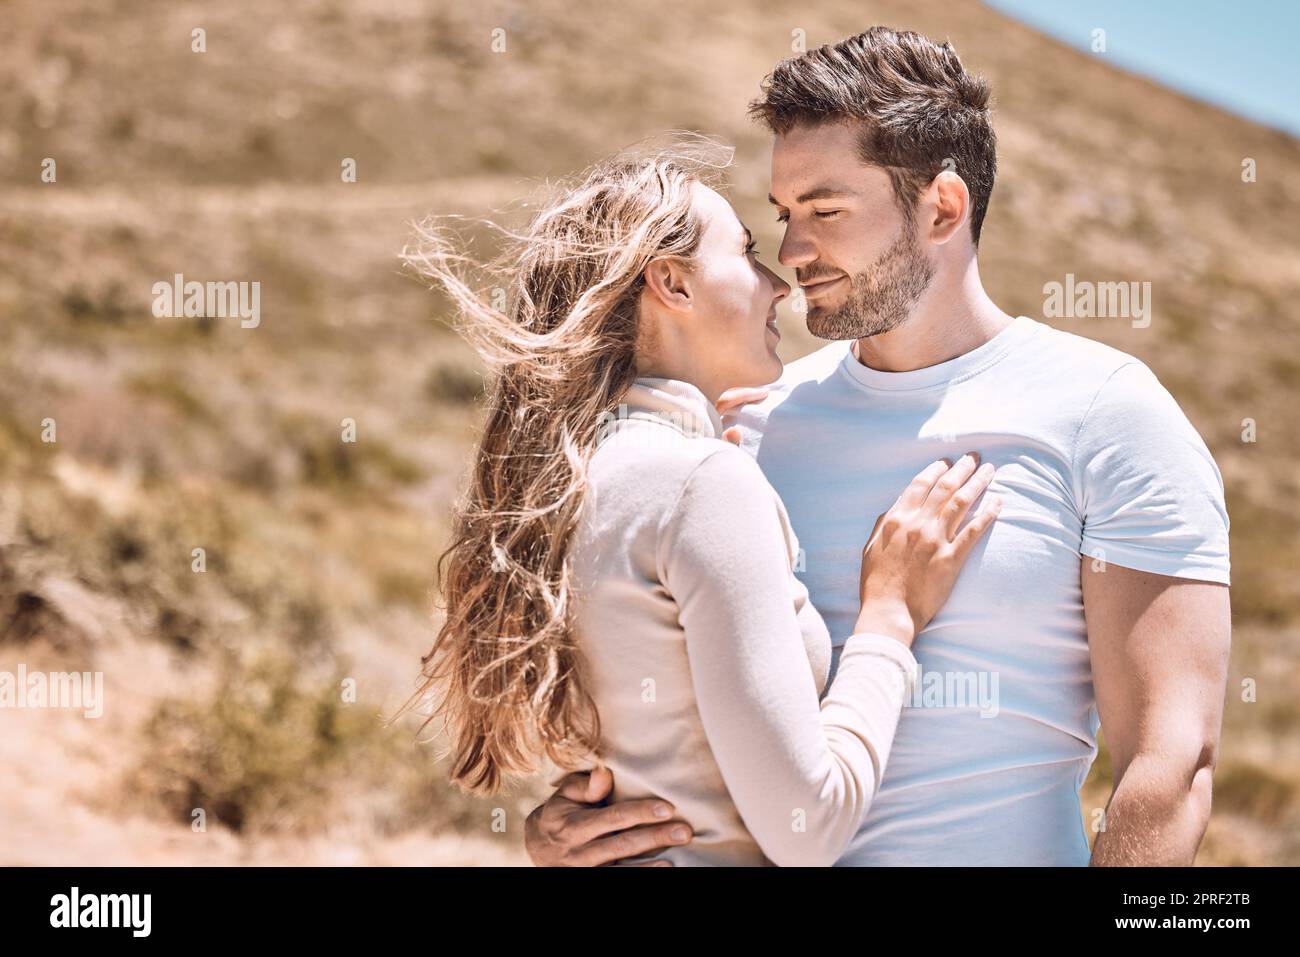 In love, hugging and bonding young couple happy, smiling on an outdoors vacation getaway. Romantic couple relax outside together embracing and loving romance, happiness and the sun on a summer day Stock Photo